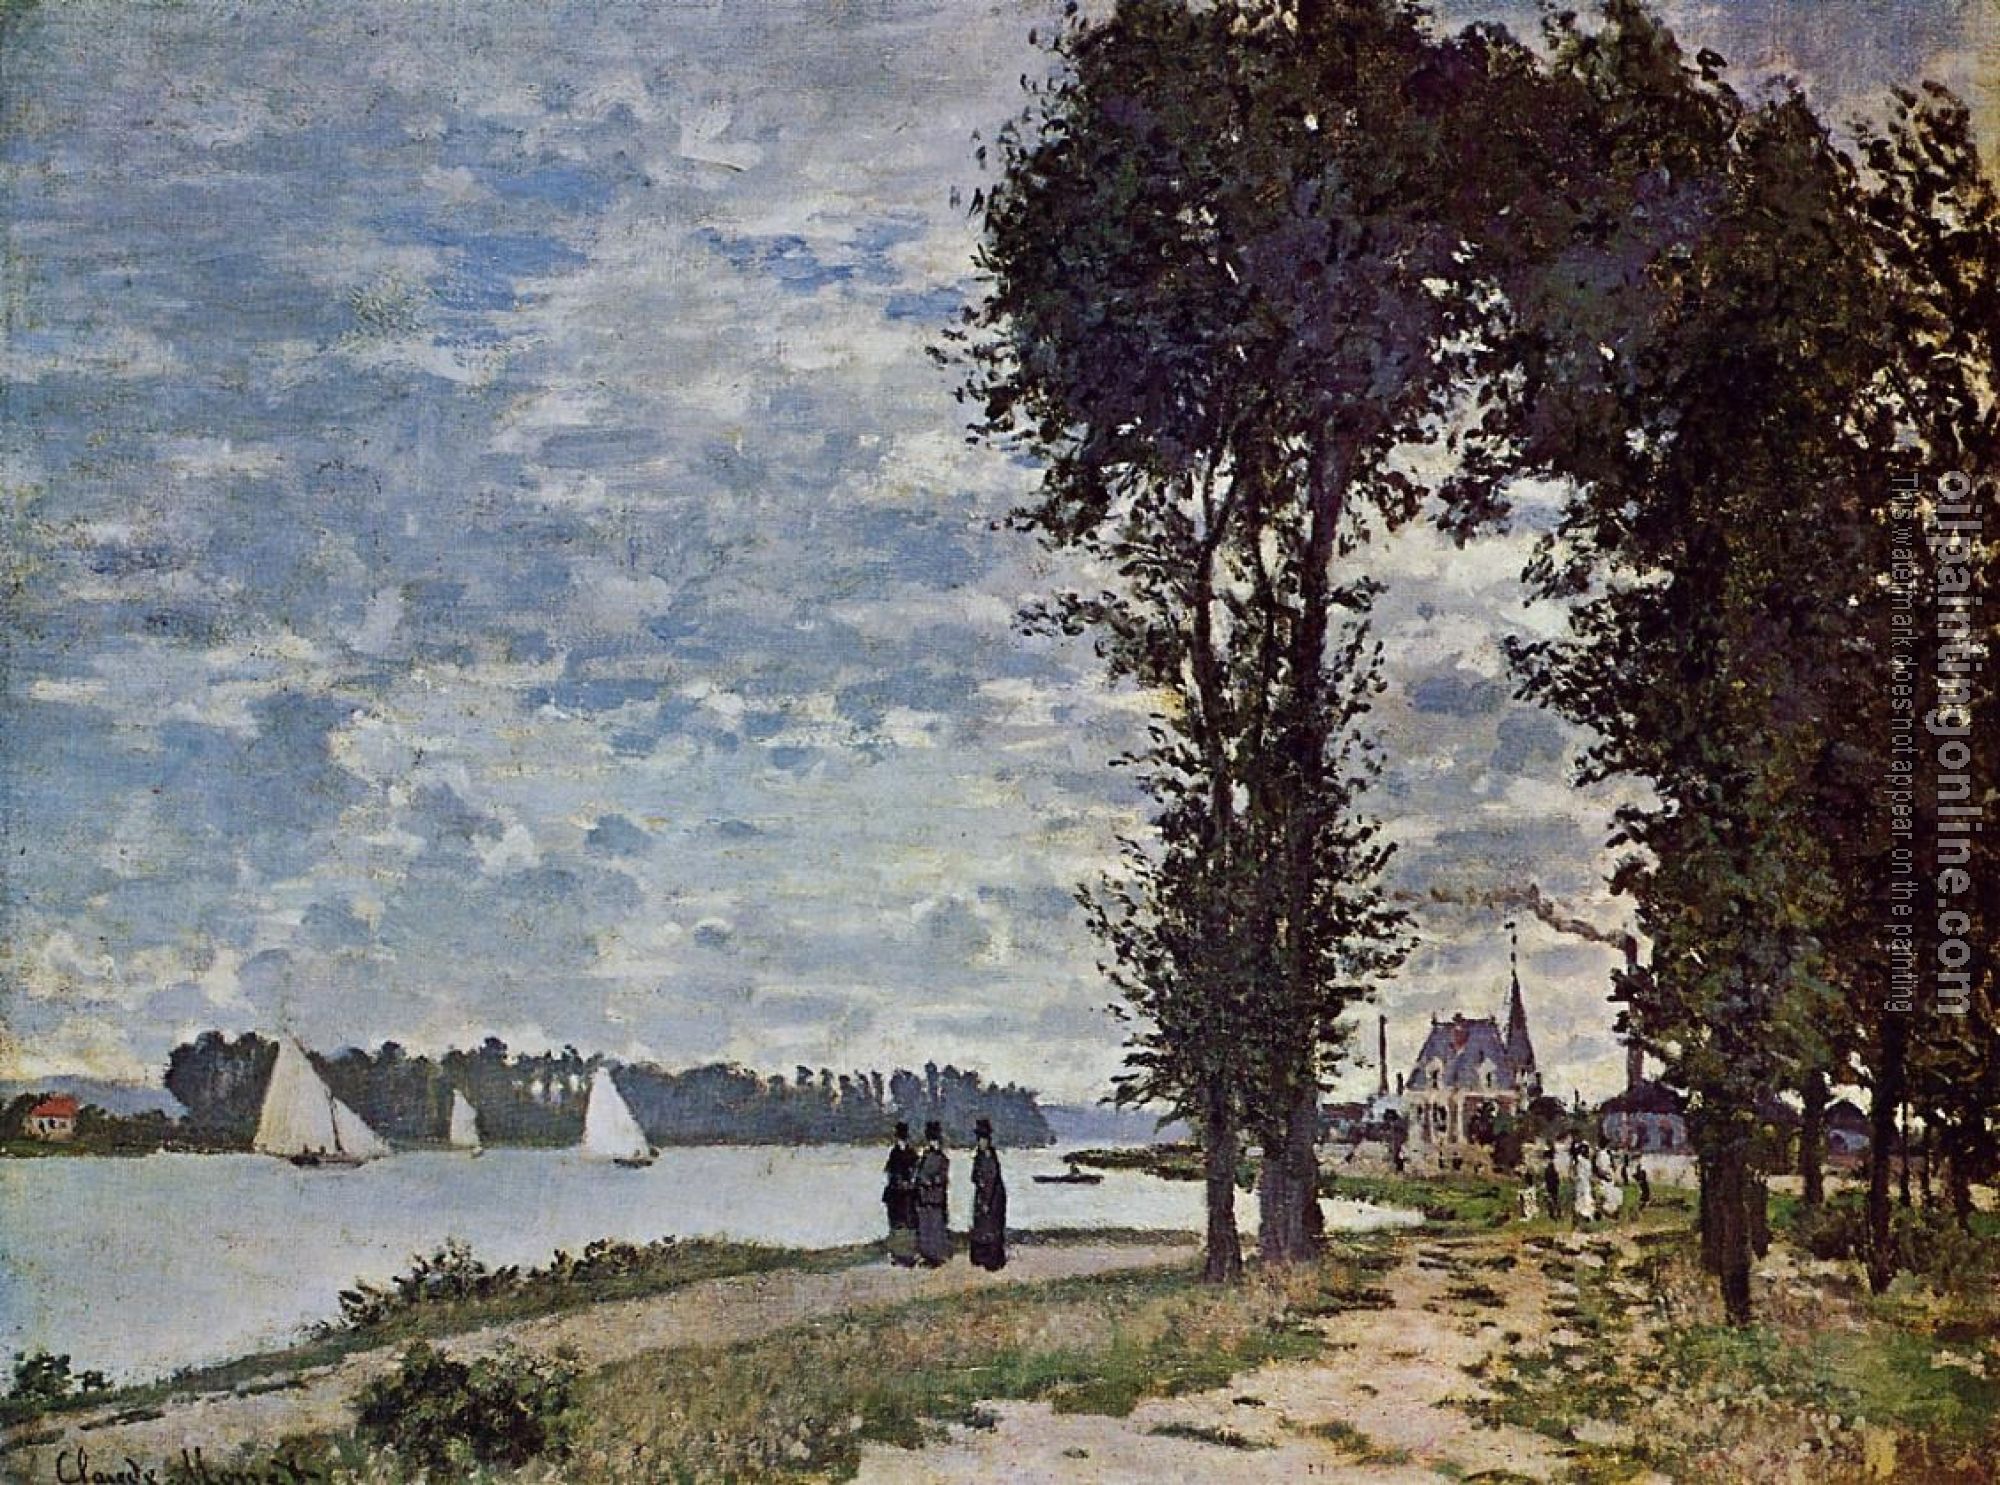 Monet, Claude Oscar - The Banks of the Seine at Argenteuil